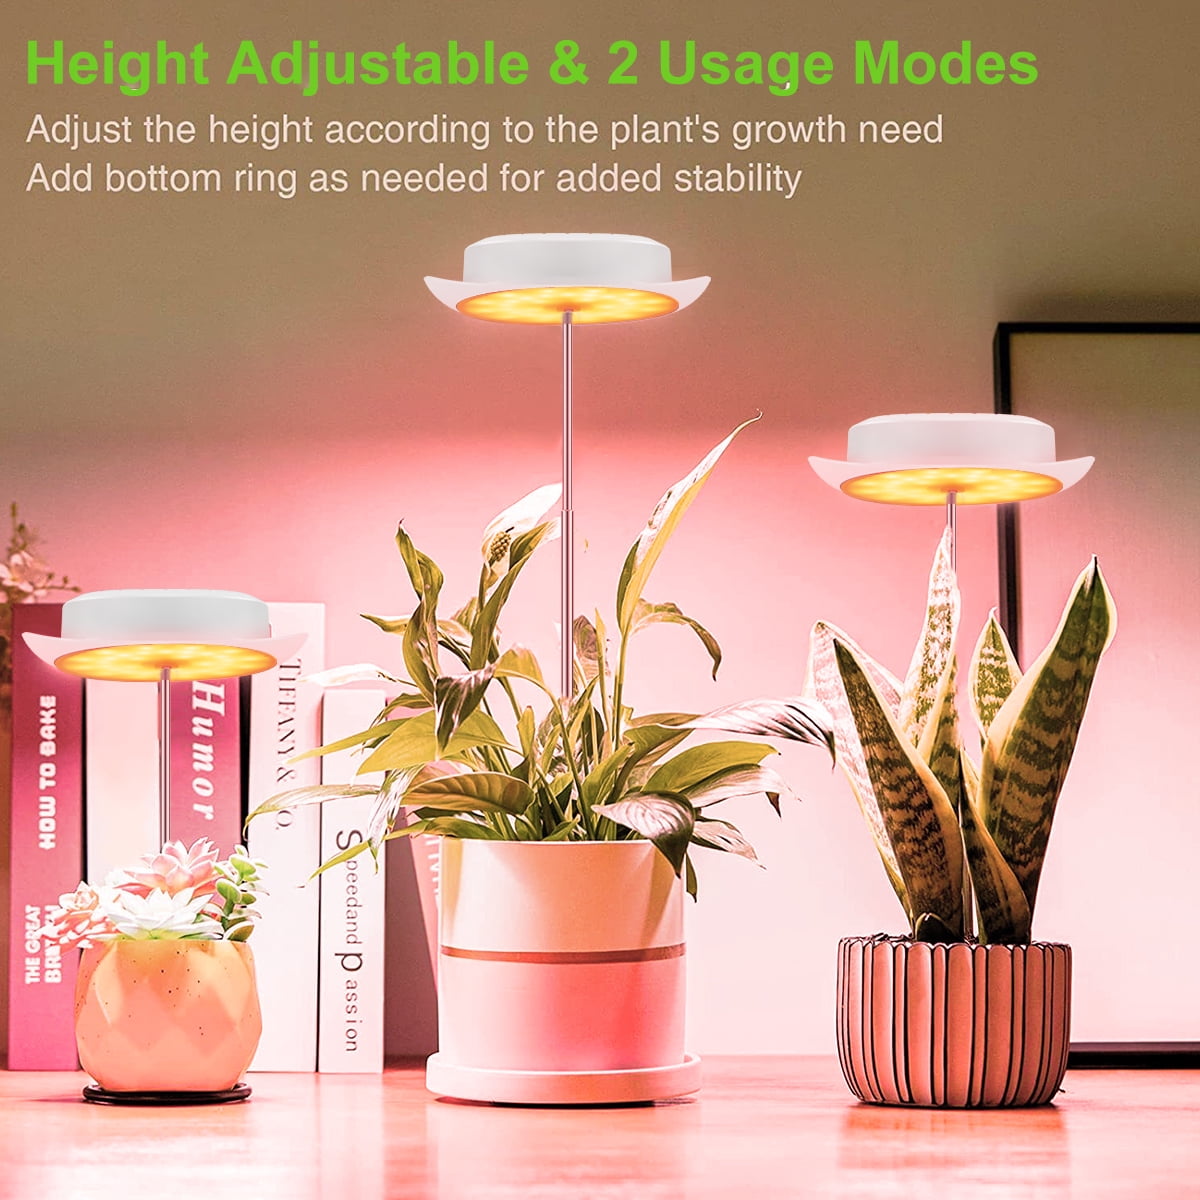 Goneryl Awaken designer Lochimu LED Grow Light for Indoor Plants 104 LED Plant Grow Lights with 3  Timer and 10 Dimmable Levels Height Adjustable Full Spectrum Growing Lamp  Jazz Hat Style Growth Light Stake for